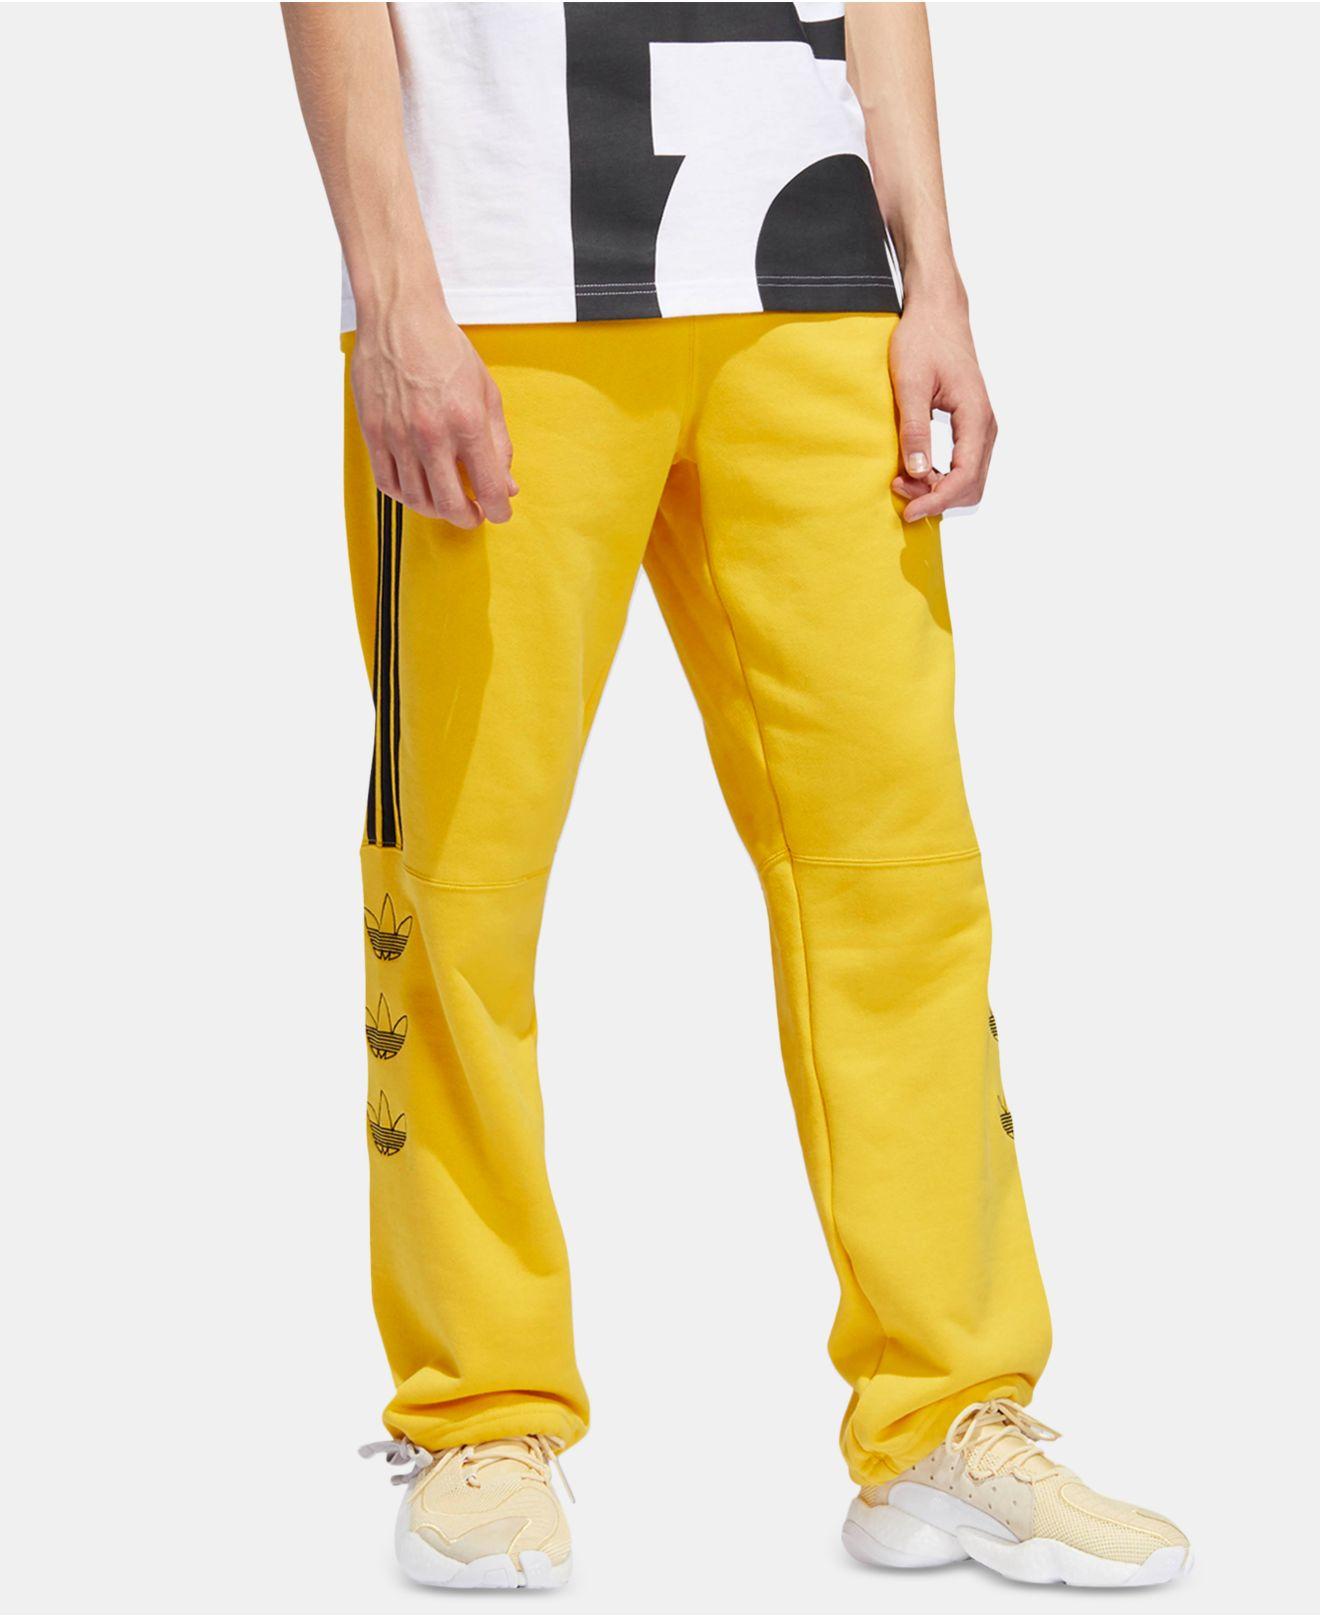 adidas Rivalry Sweatpants in Yellow for Men - Lyst